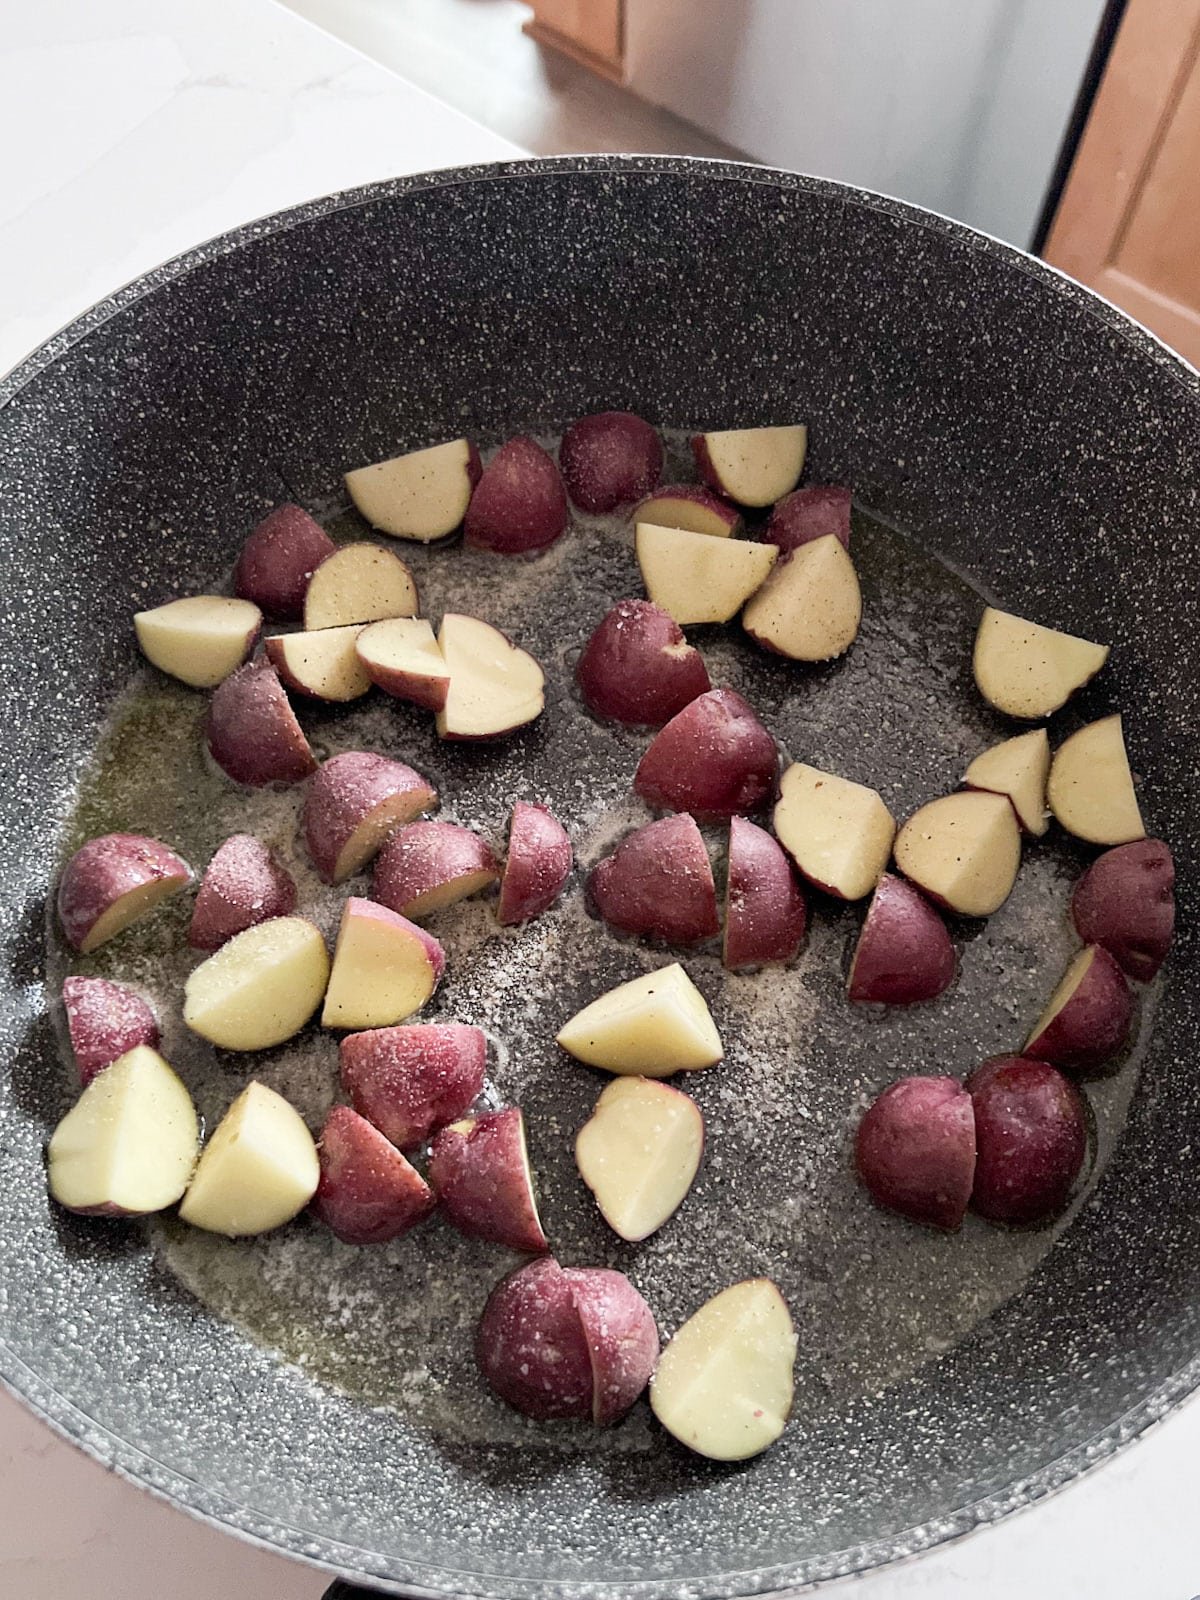 Potatoes added to the butter in the skillet.